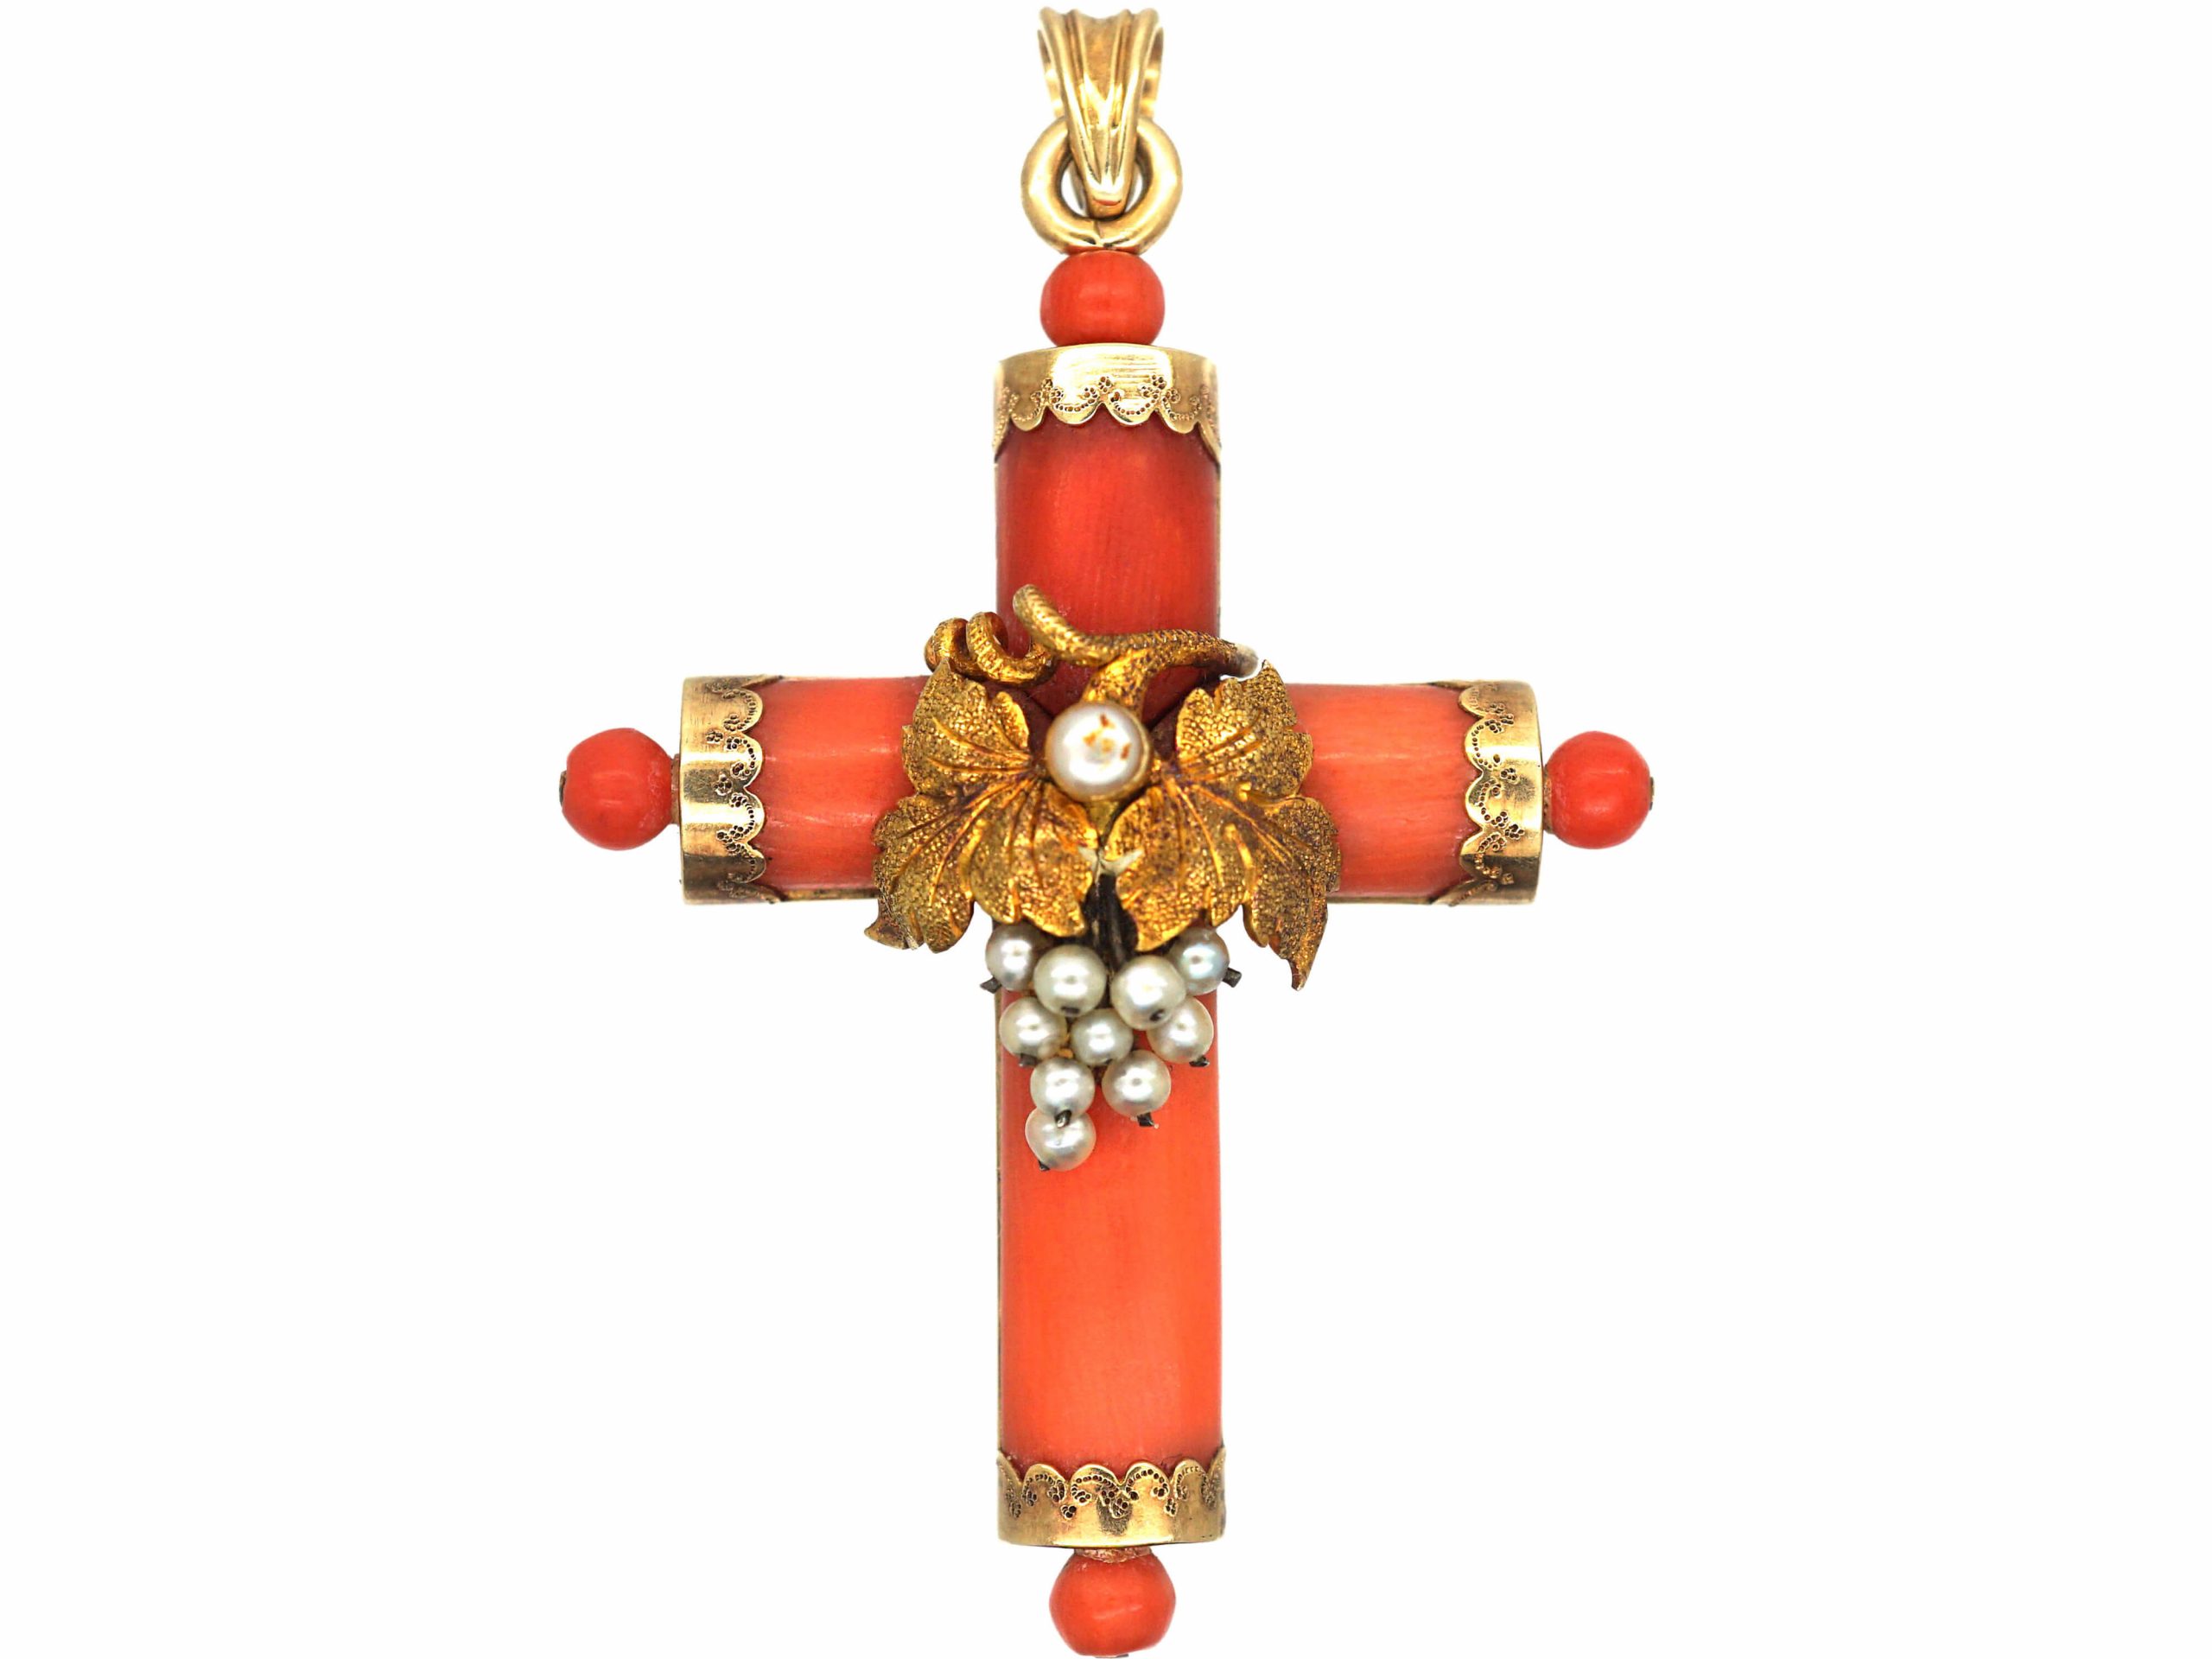 Regency 15ct Gold, Coral & Natural Pearl Cross with Grapes Motif